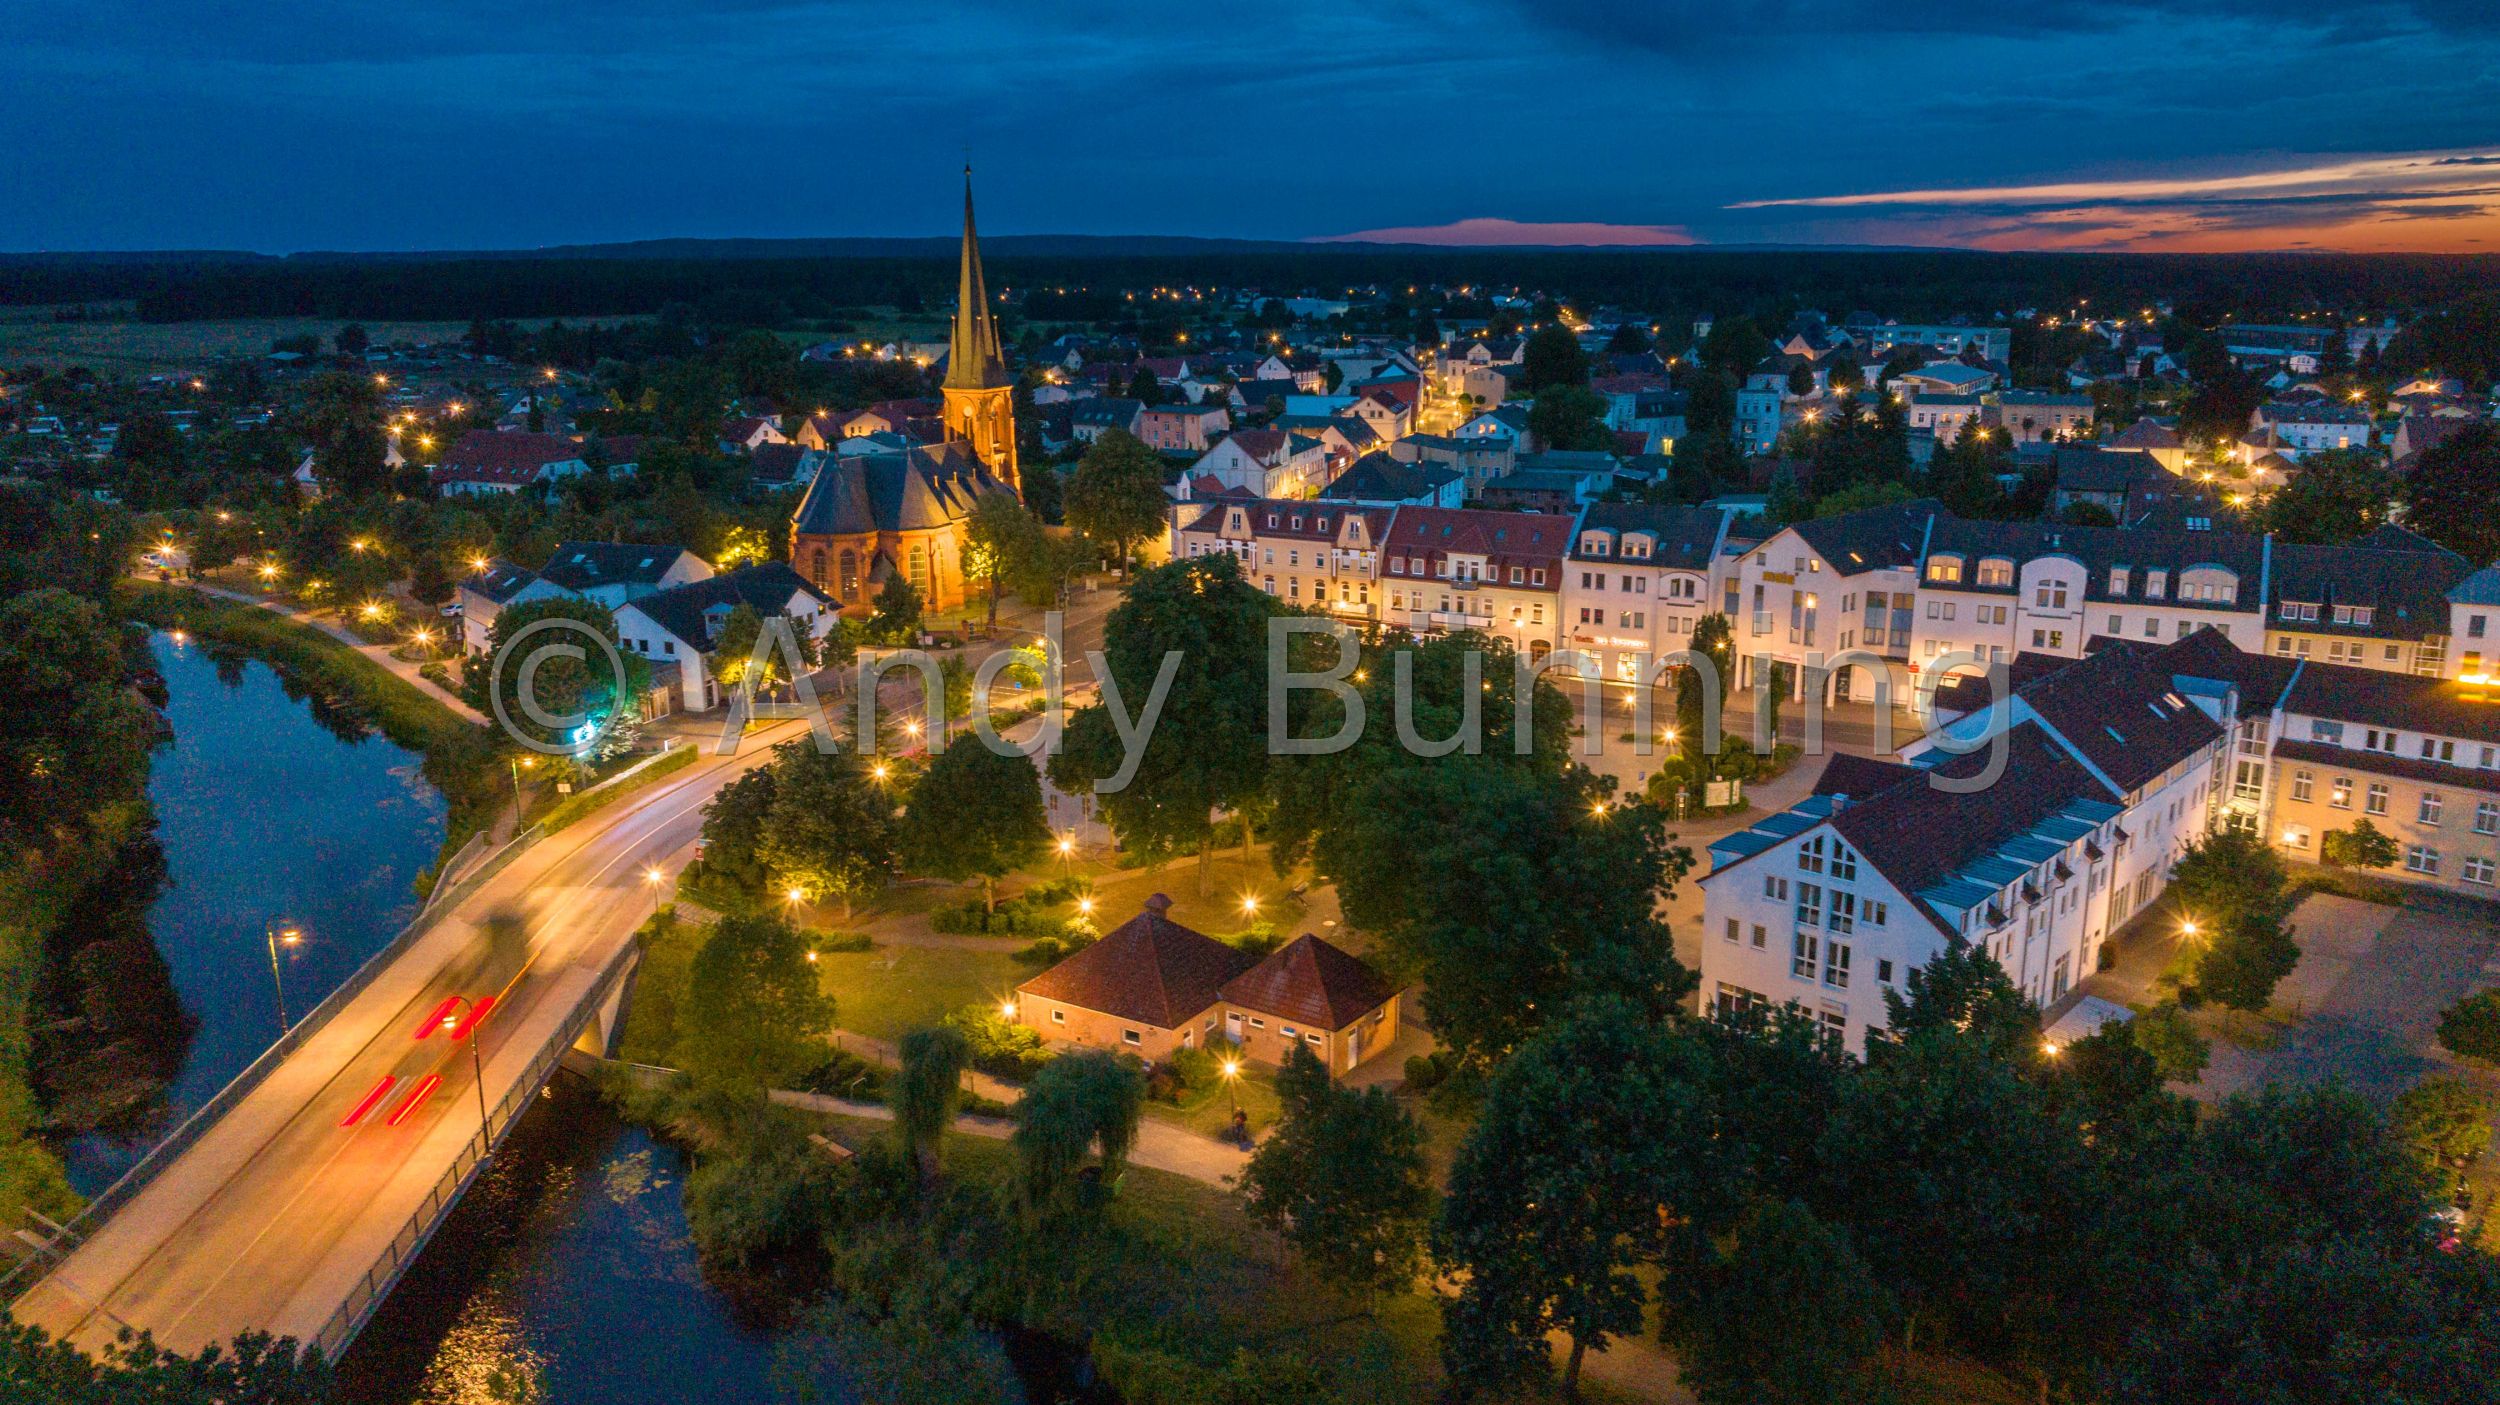 Preview ab230717_Torgelow-Abends_0012.jpg